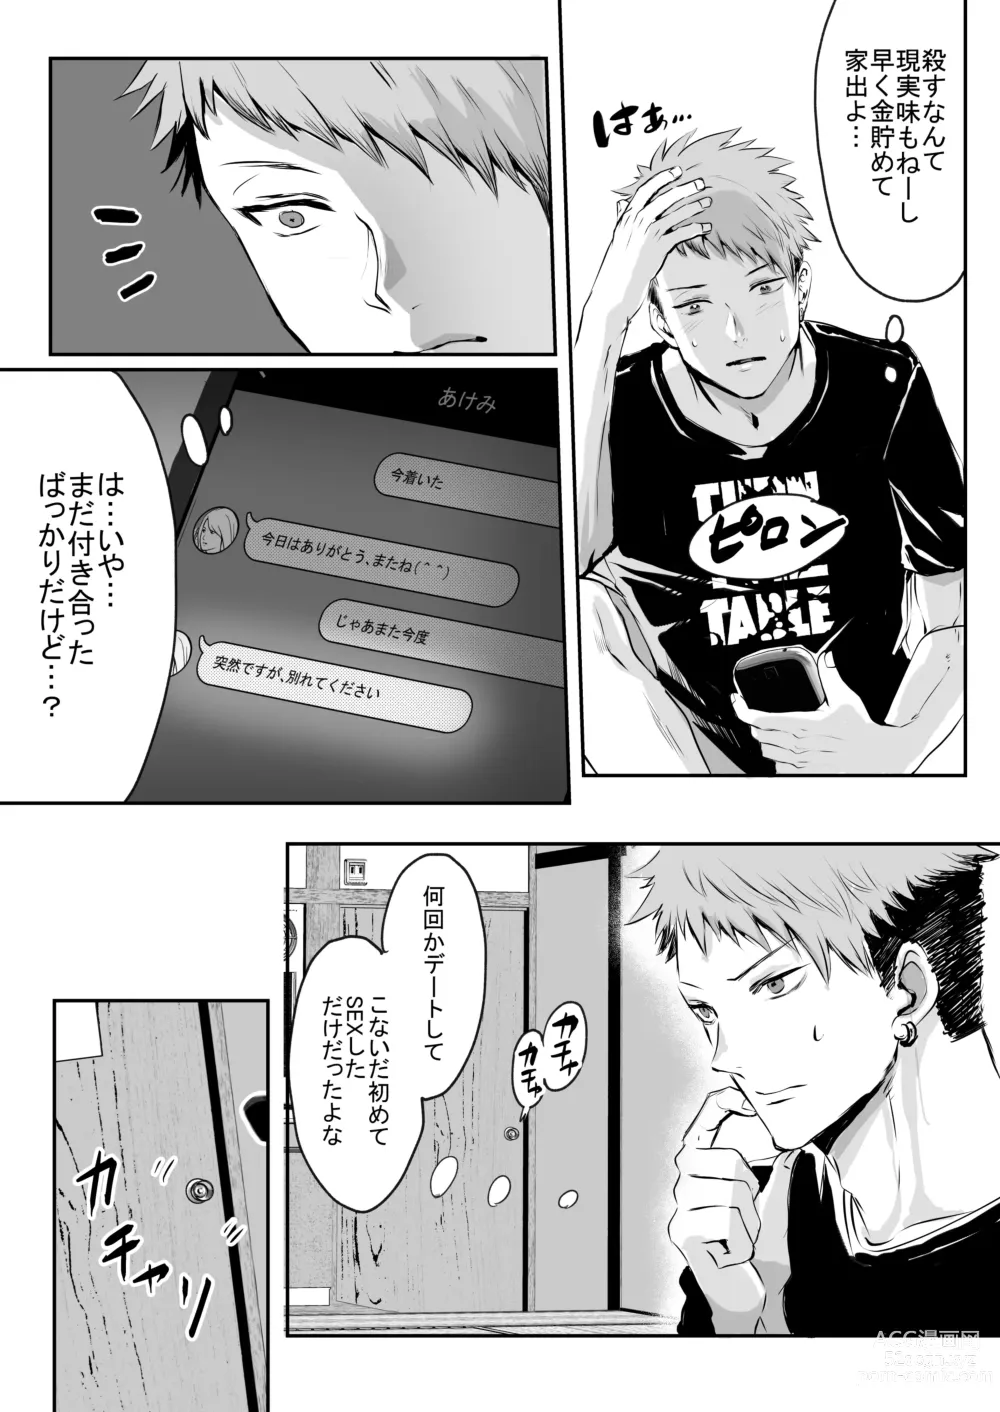 Page 13 of doujinshi Im crazy for you.